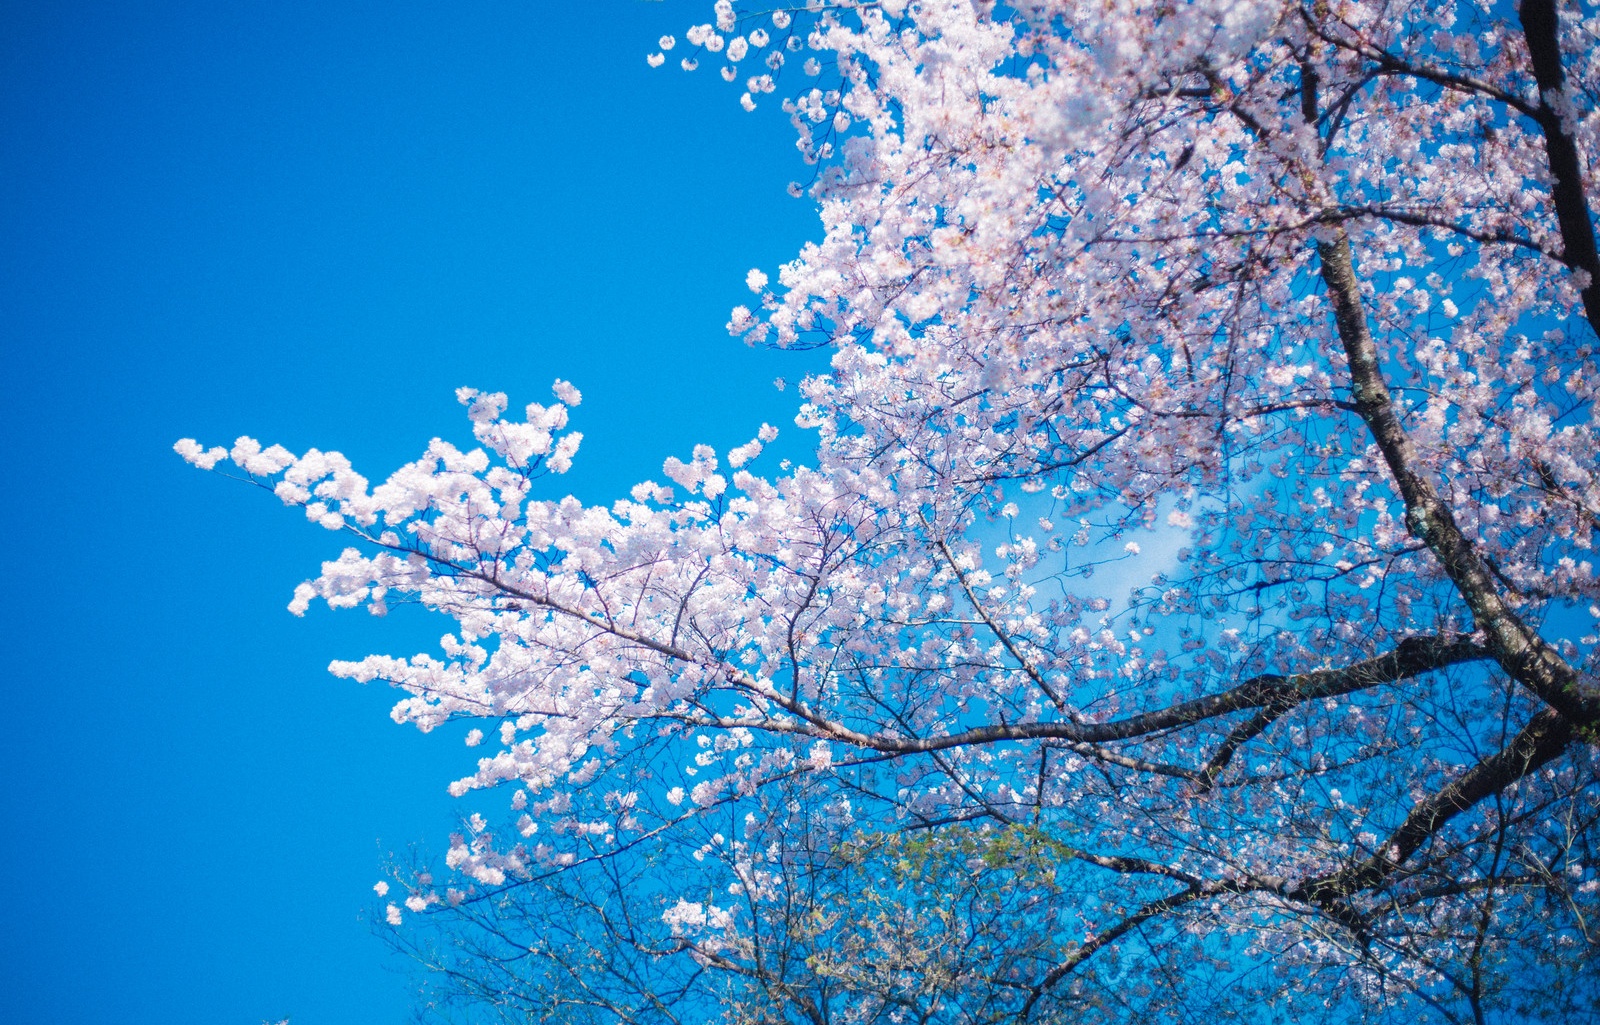 The Cherry Blossom Forecast for 2018 Is Here